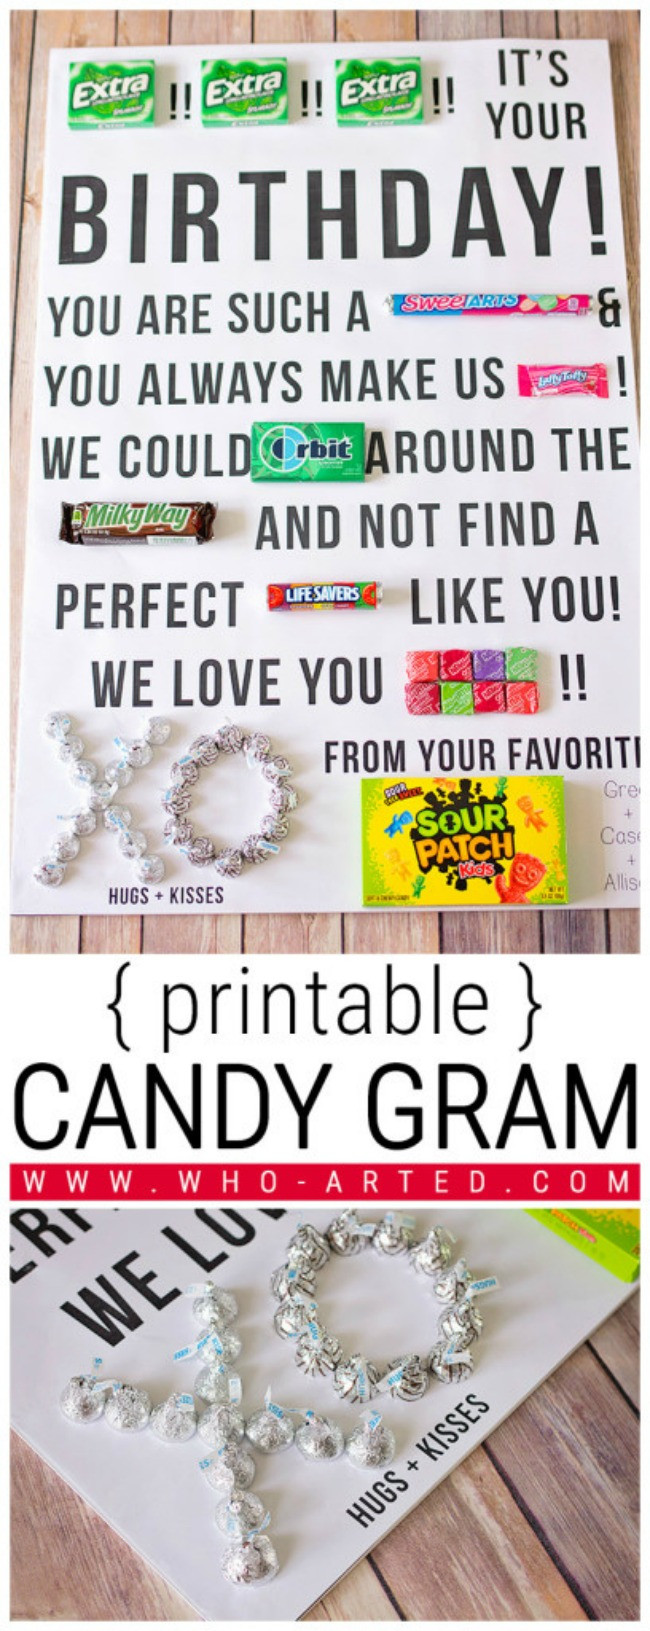 Candy Birthday Cards
 The 11 Best Candy Gram Ideas